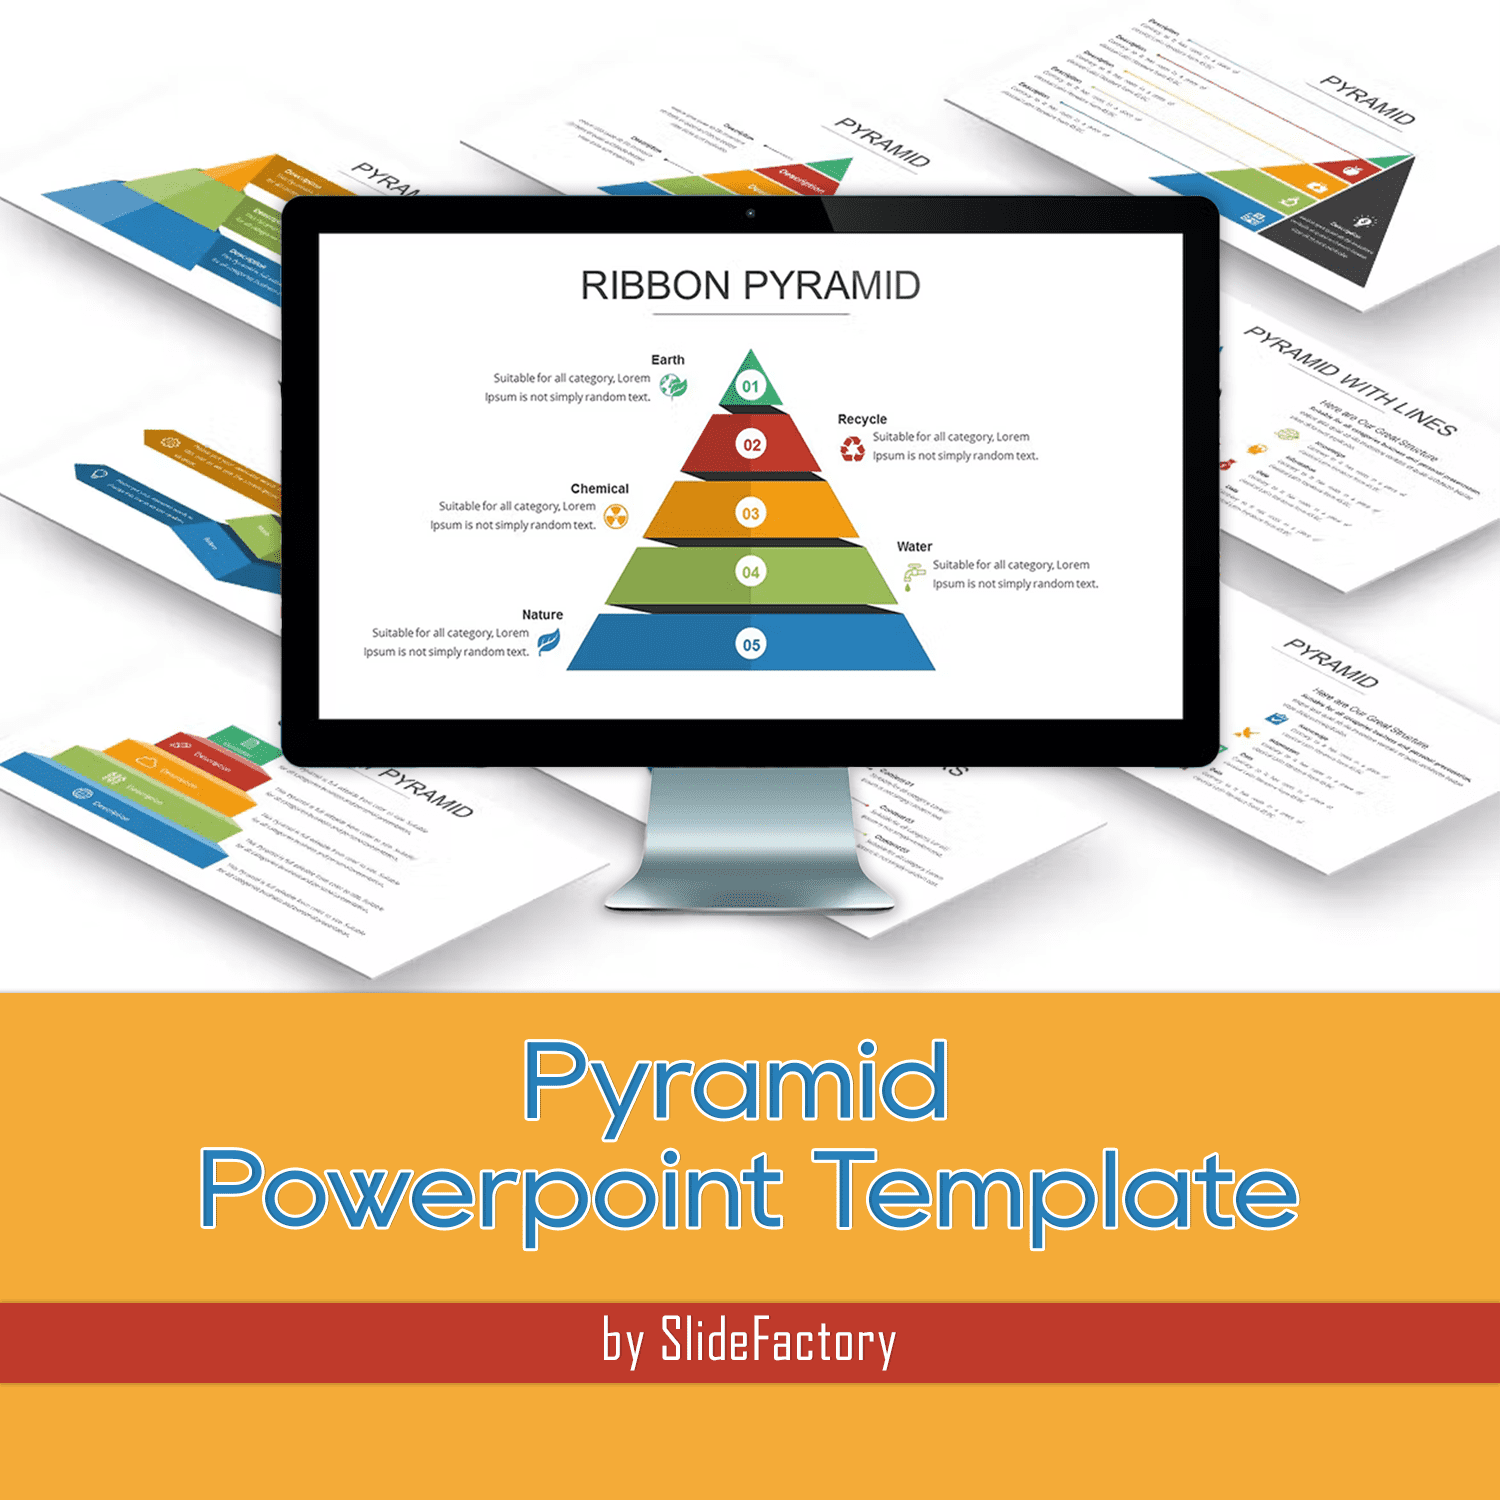 Pyramid Powerpoint Template Cover.